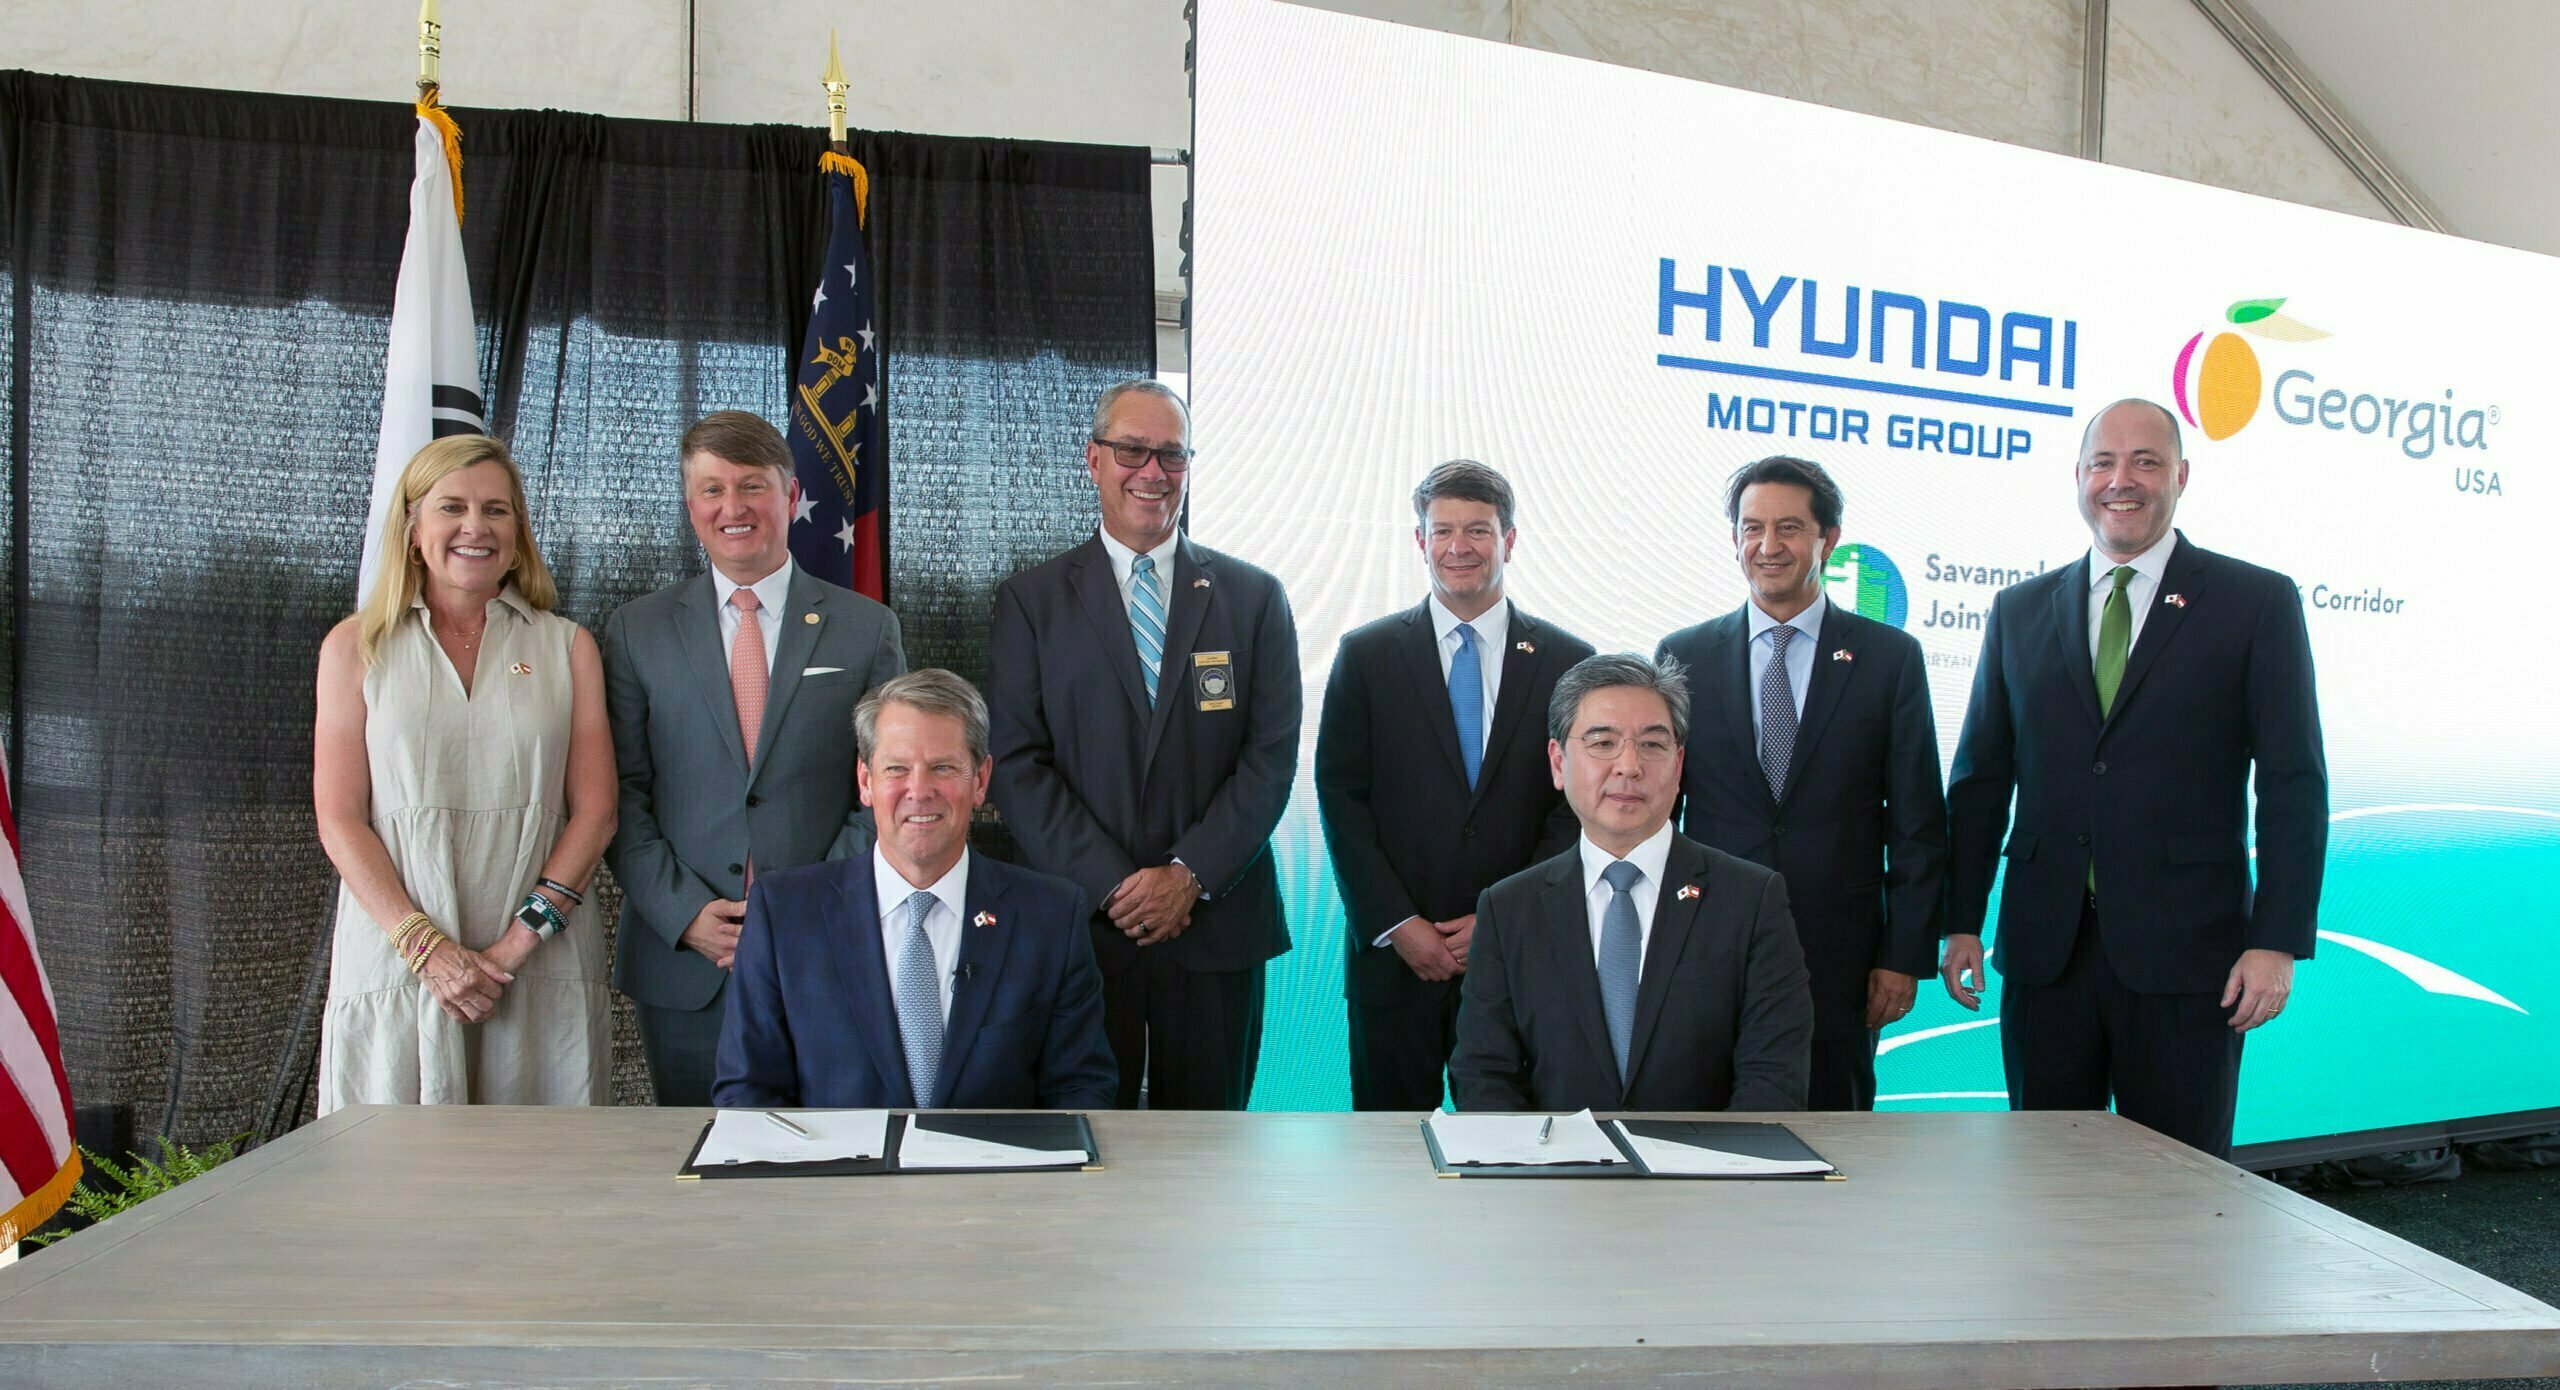 Hyundai To Build First Dedicated Electric Vehicle Factory In Georgia, USA